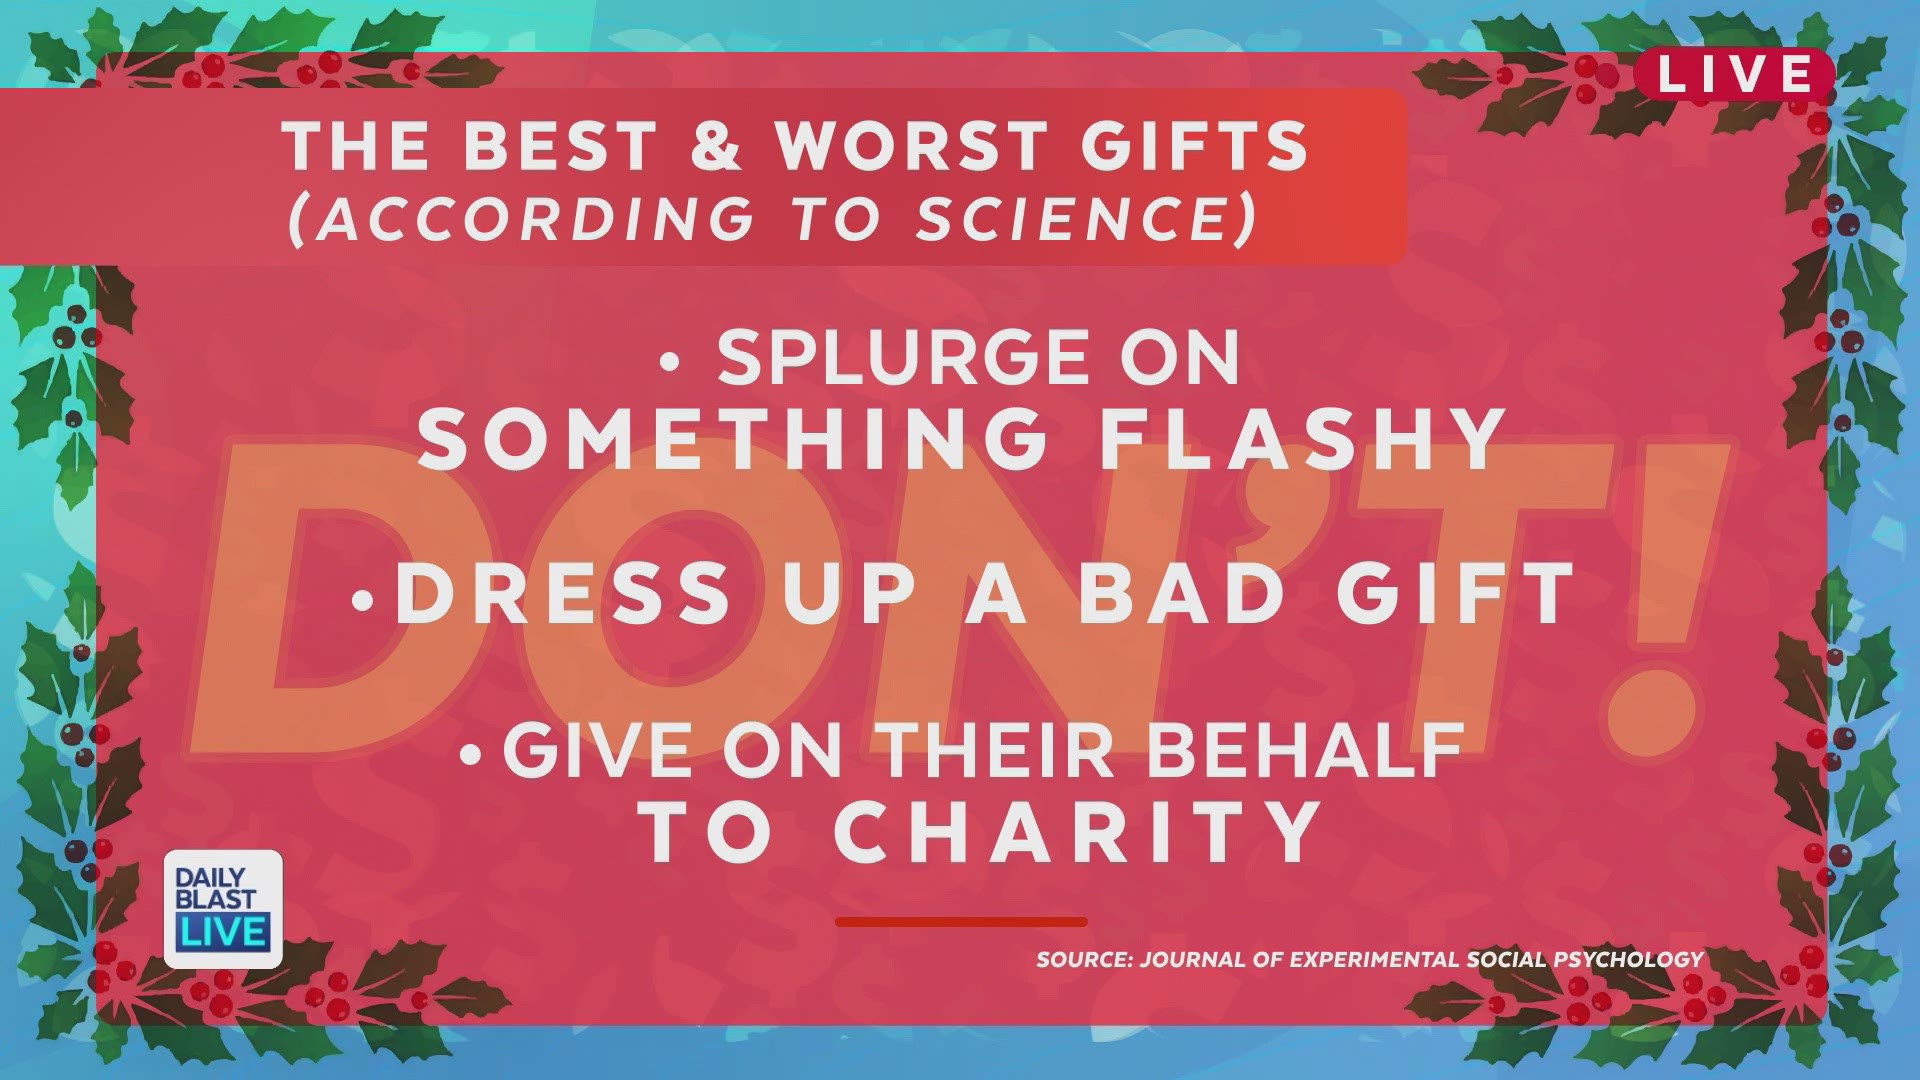 How to Give Better Gifts, According to Science